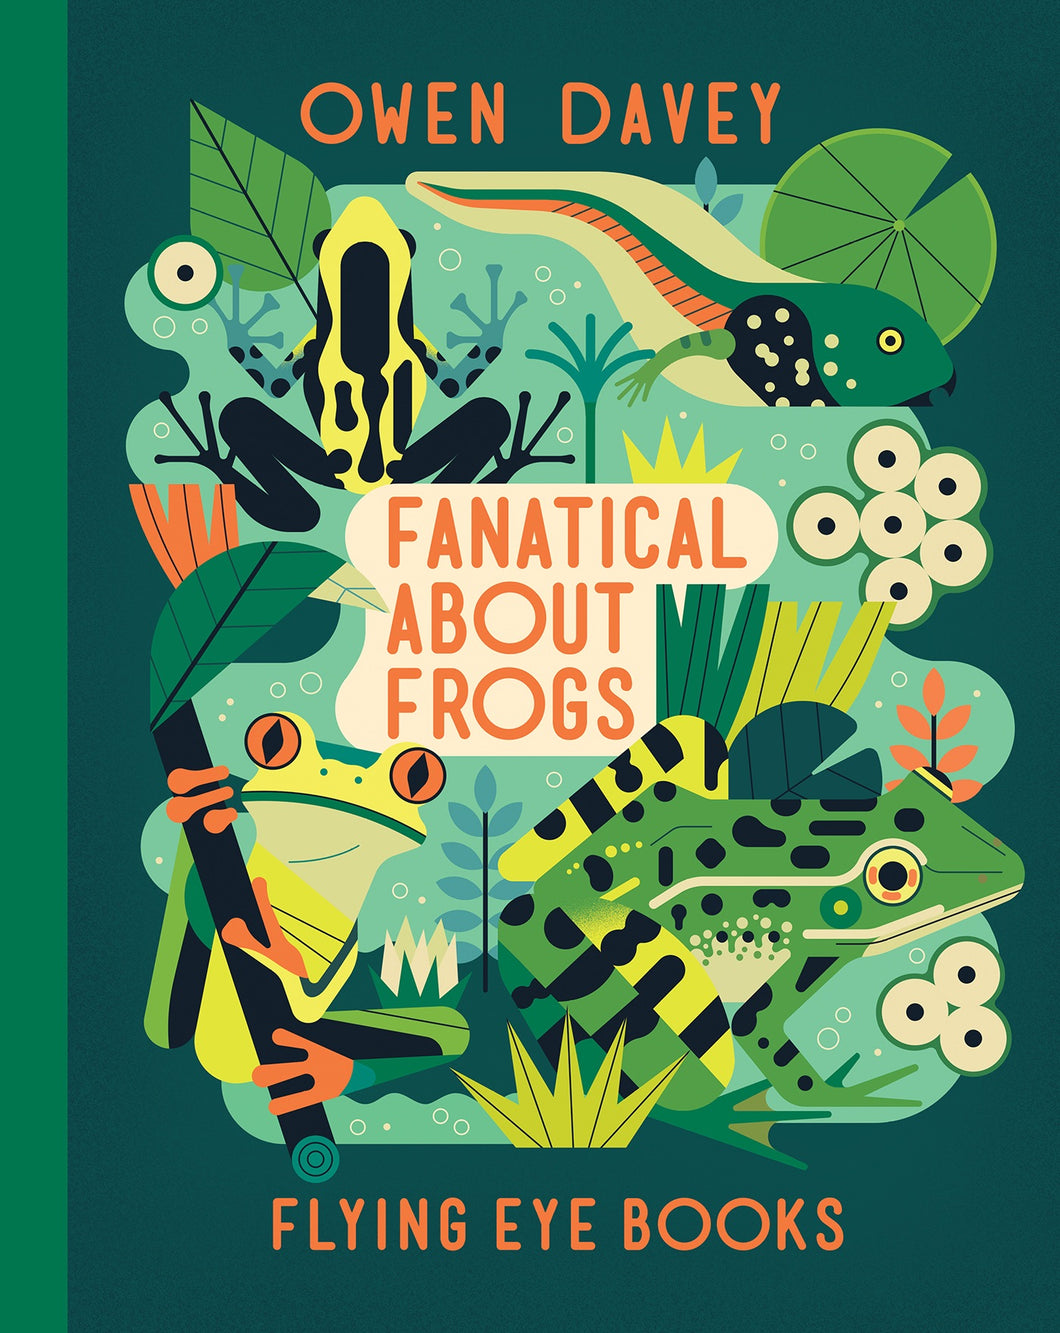 Fanatical About Frogs - Things They Love